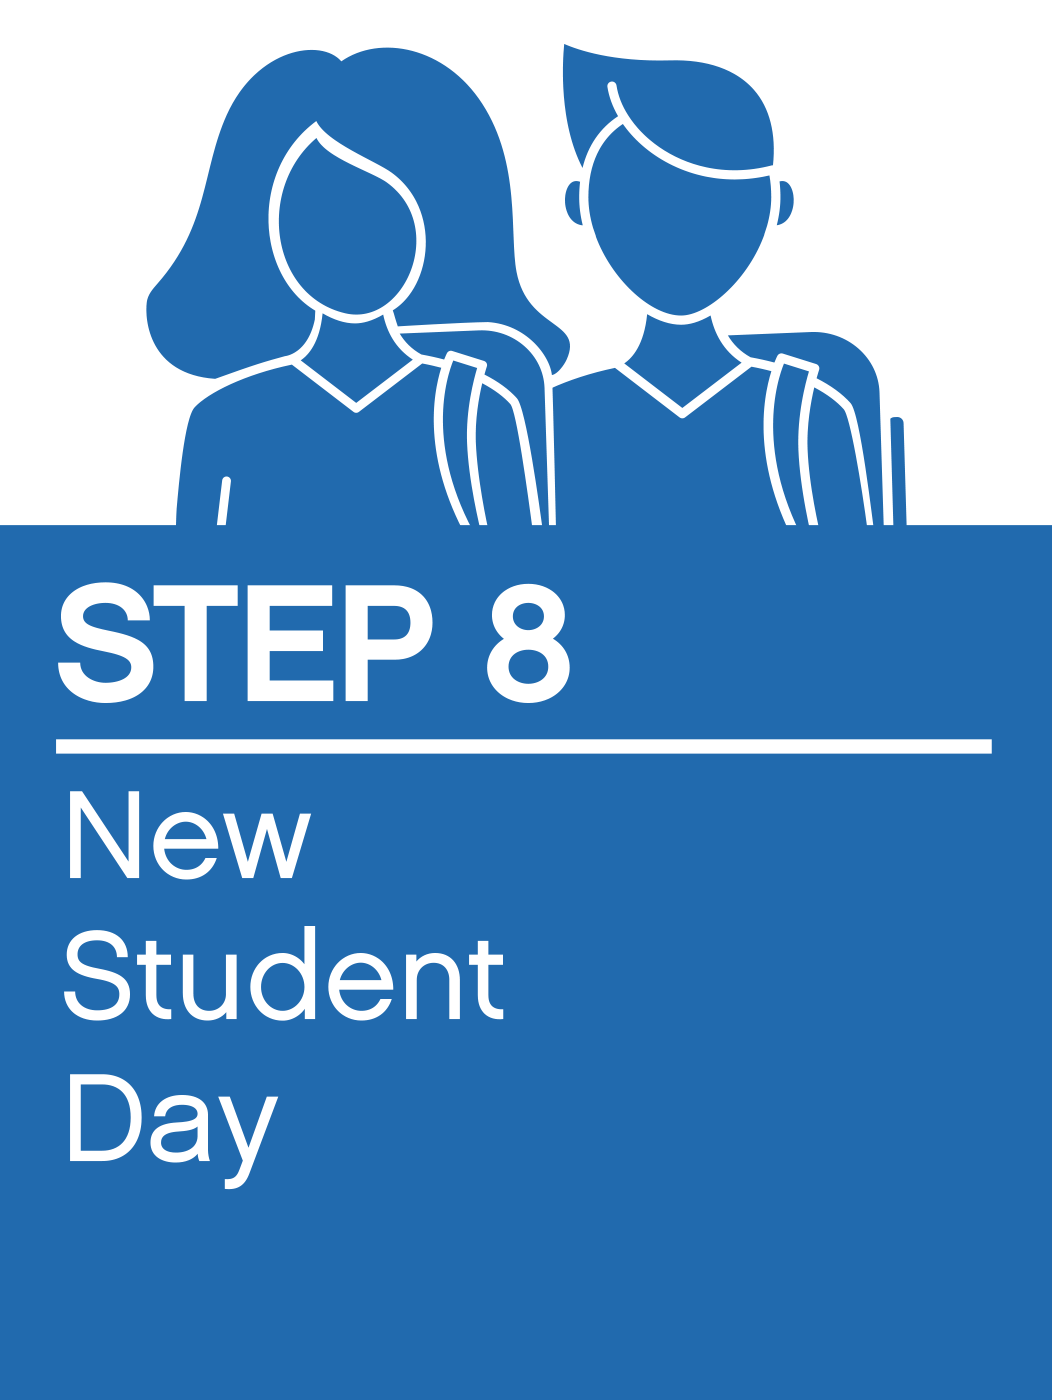 Step 8: New Student Day